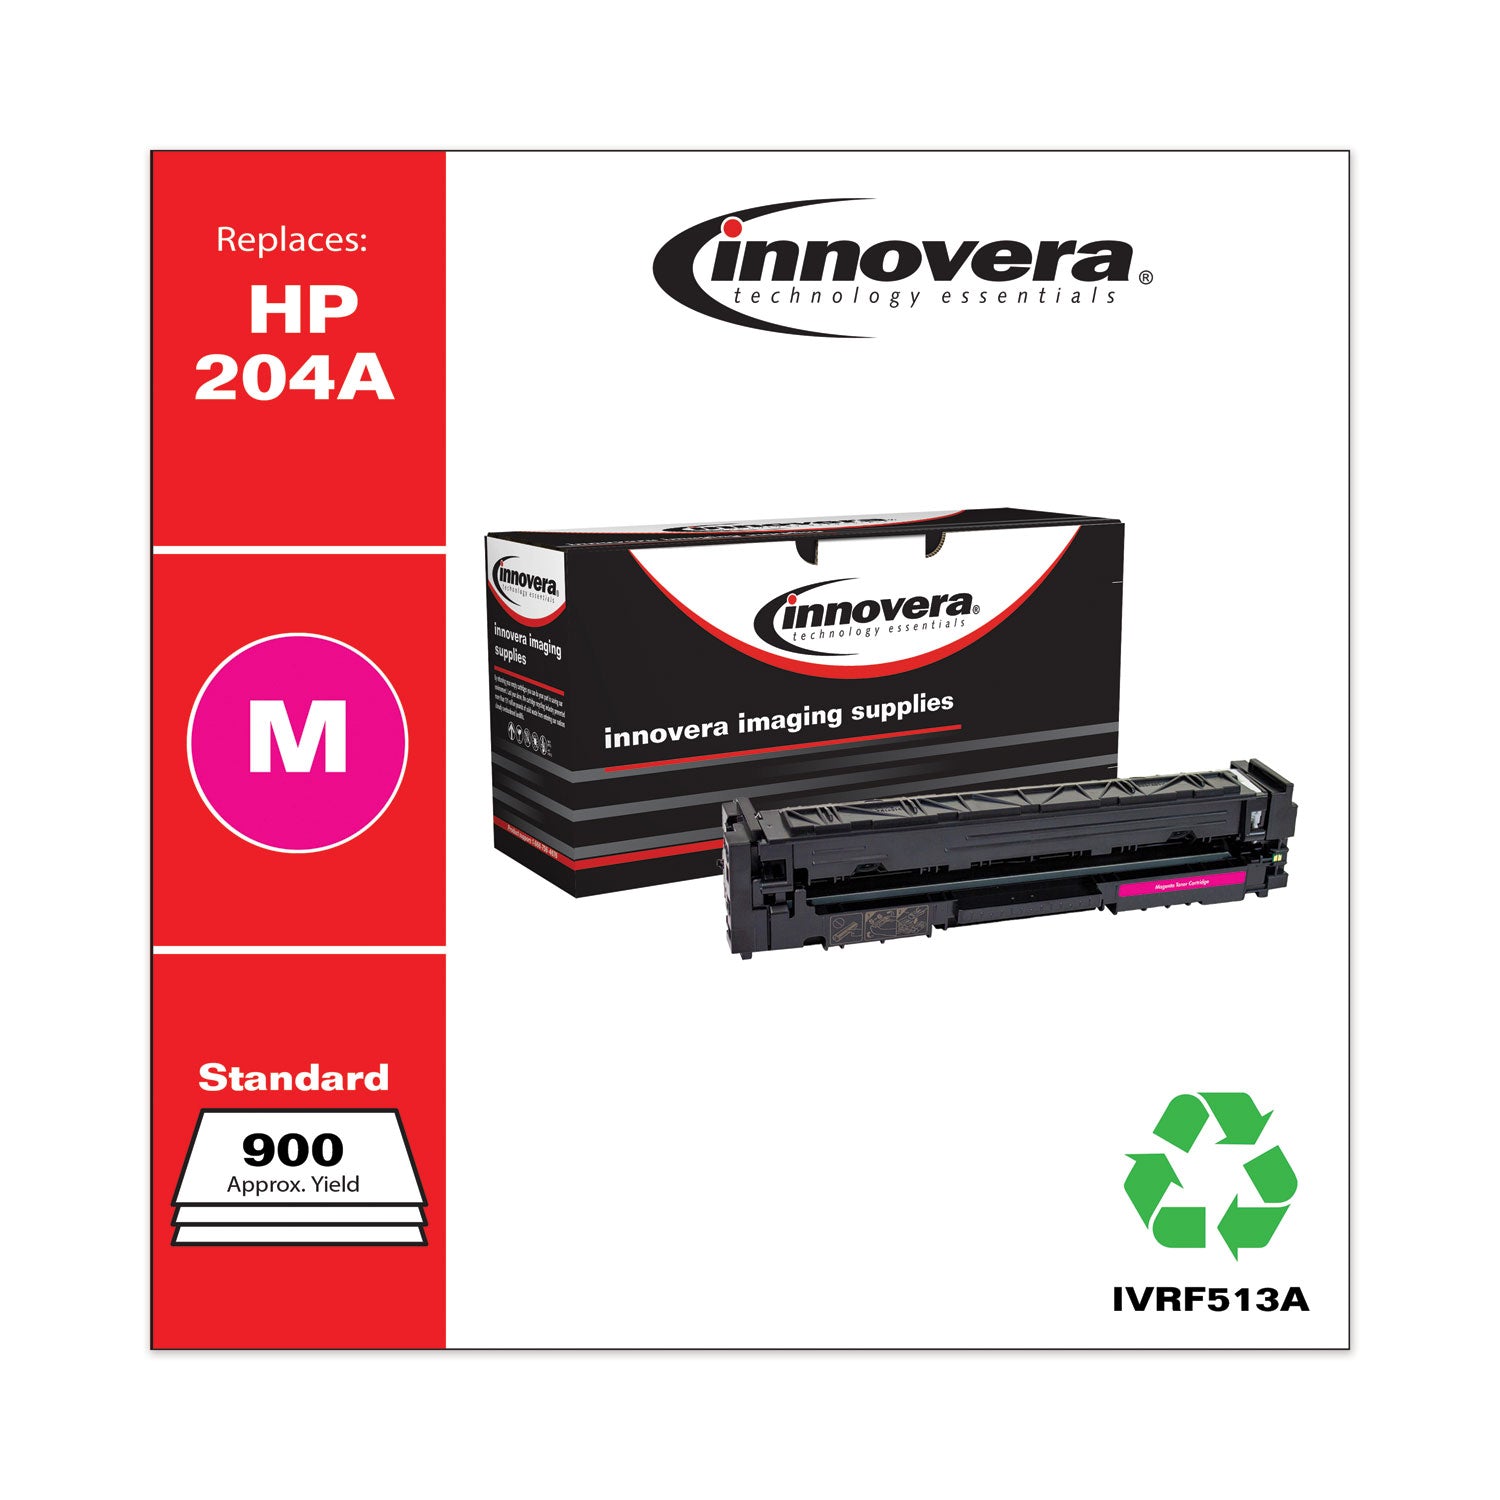 remanufactured-magenta-toner-replacement-for-204a-cf513a-900-page-yield_ivrf513a - 2